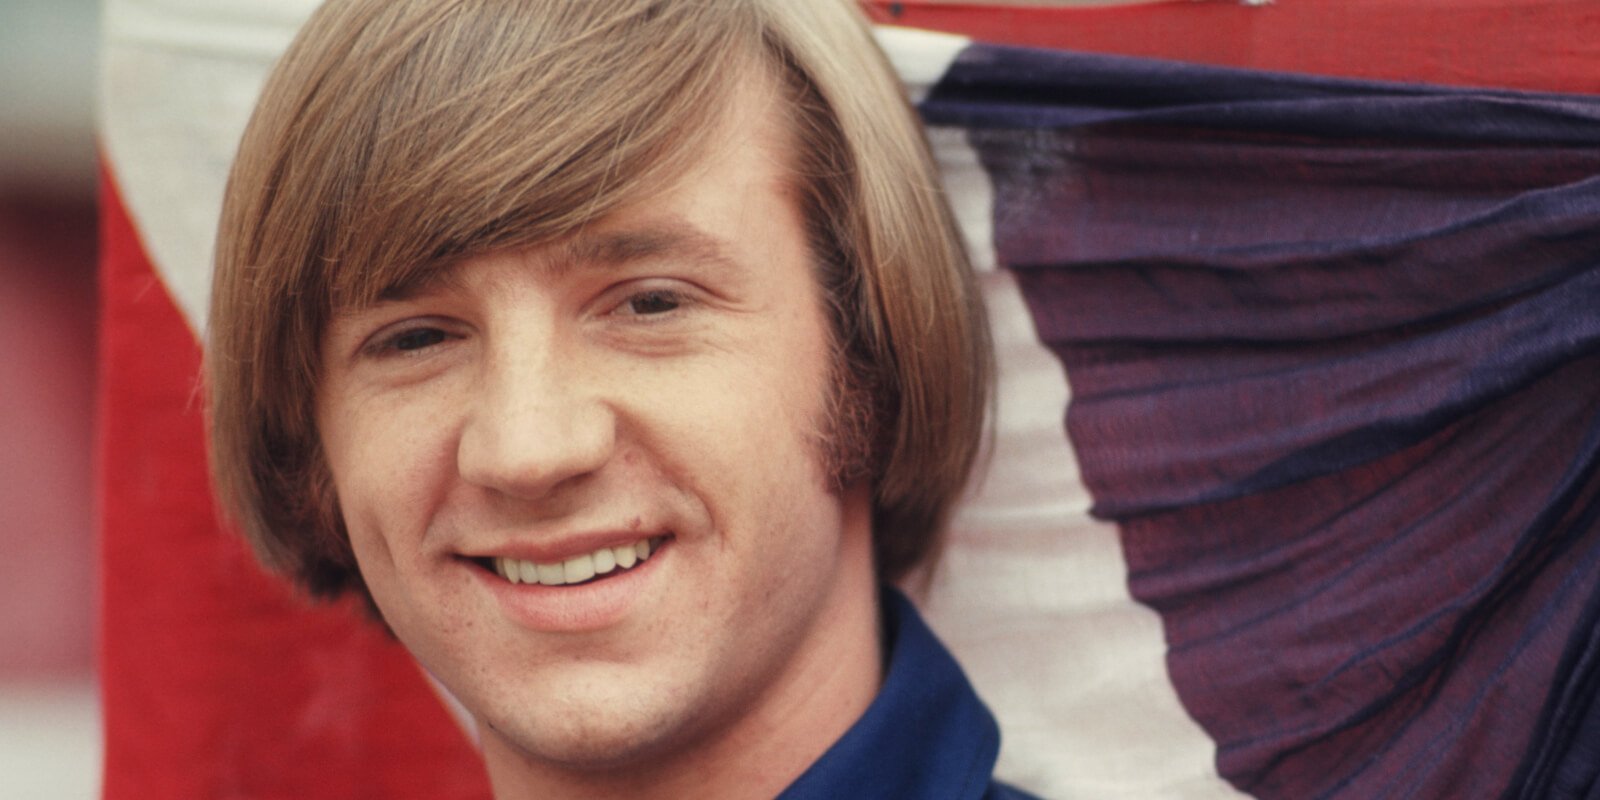 Peter Tork of The Monkees photographed in June 1967.